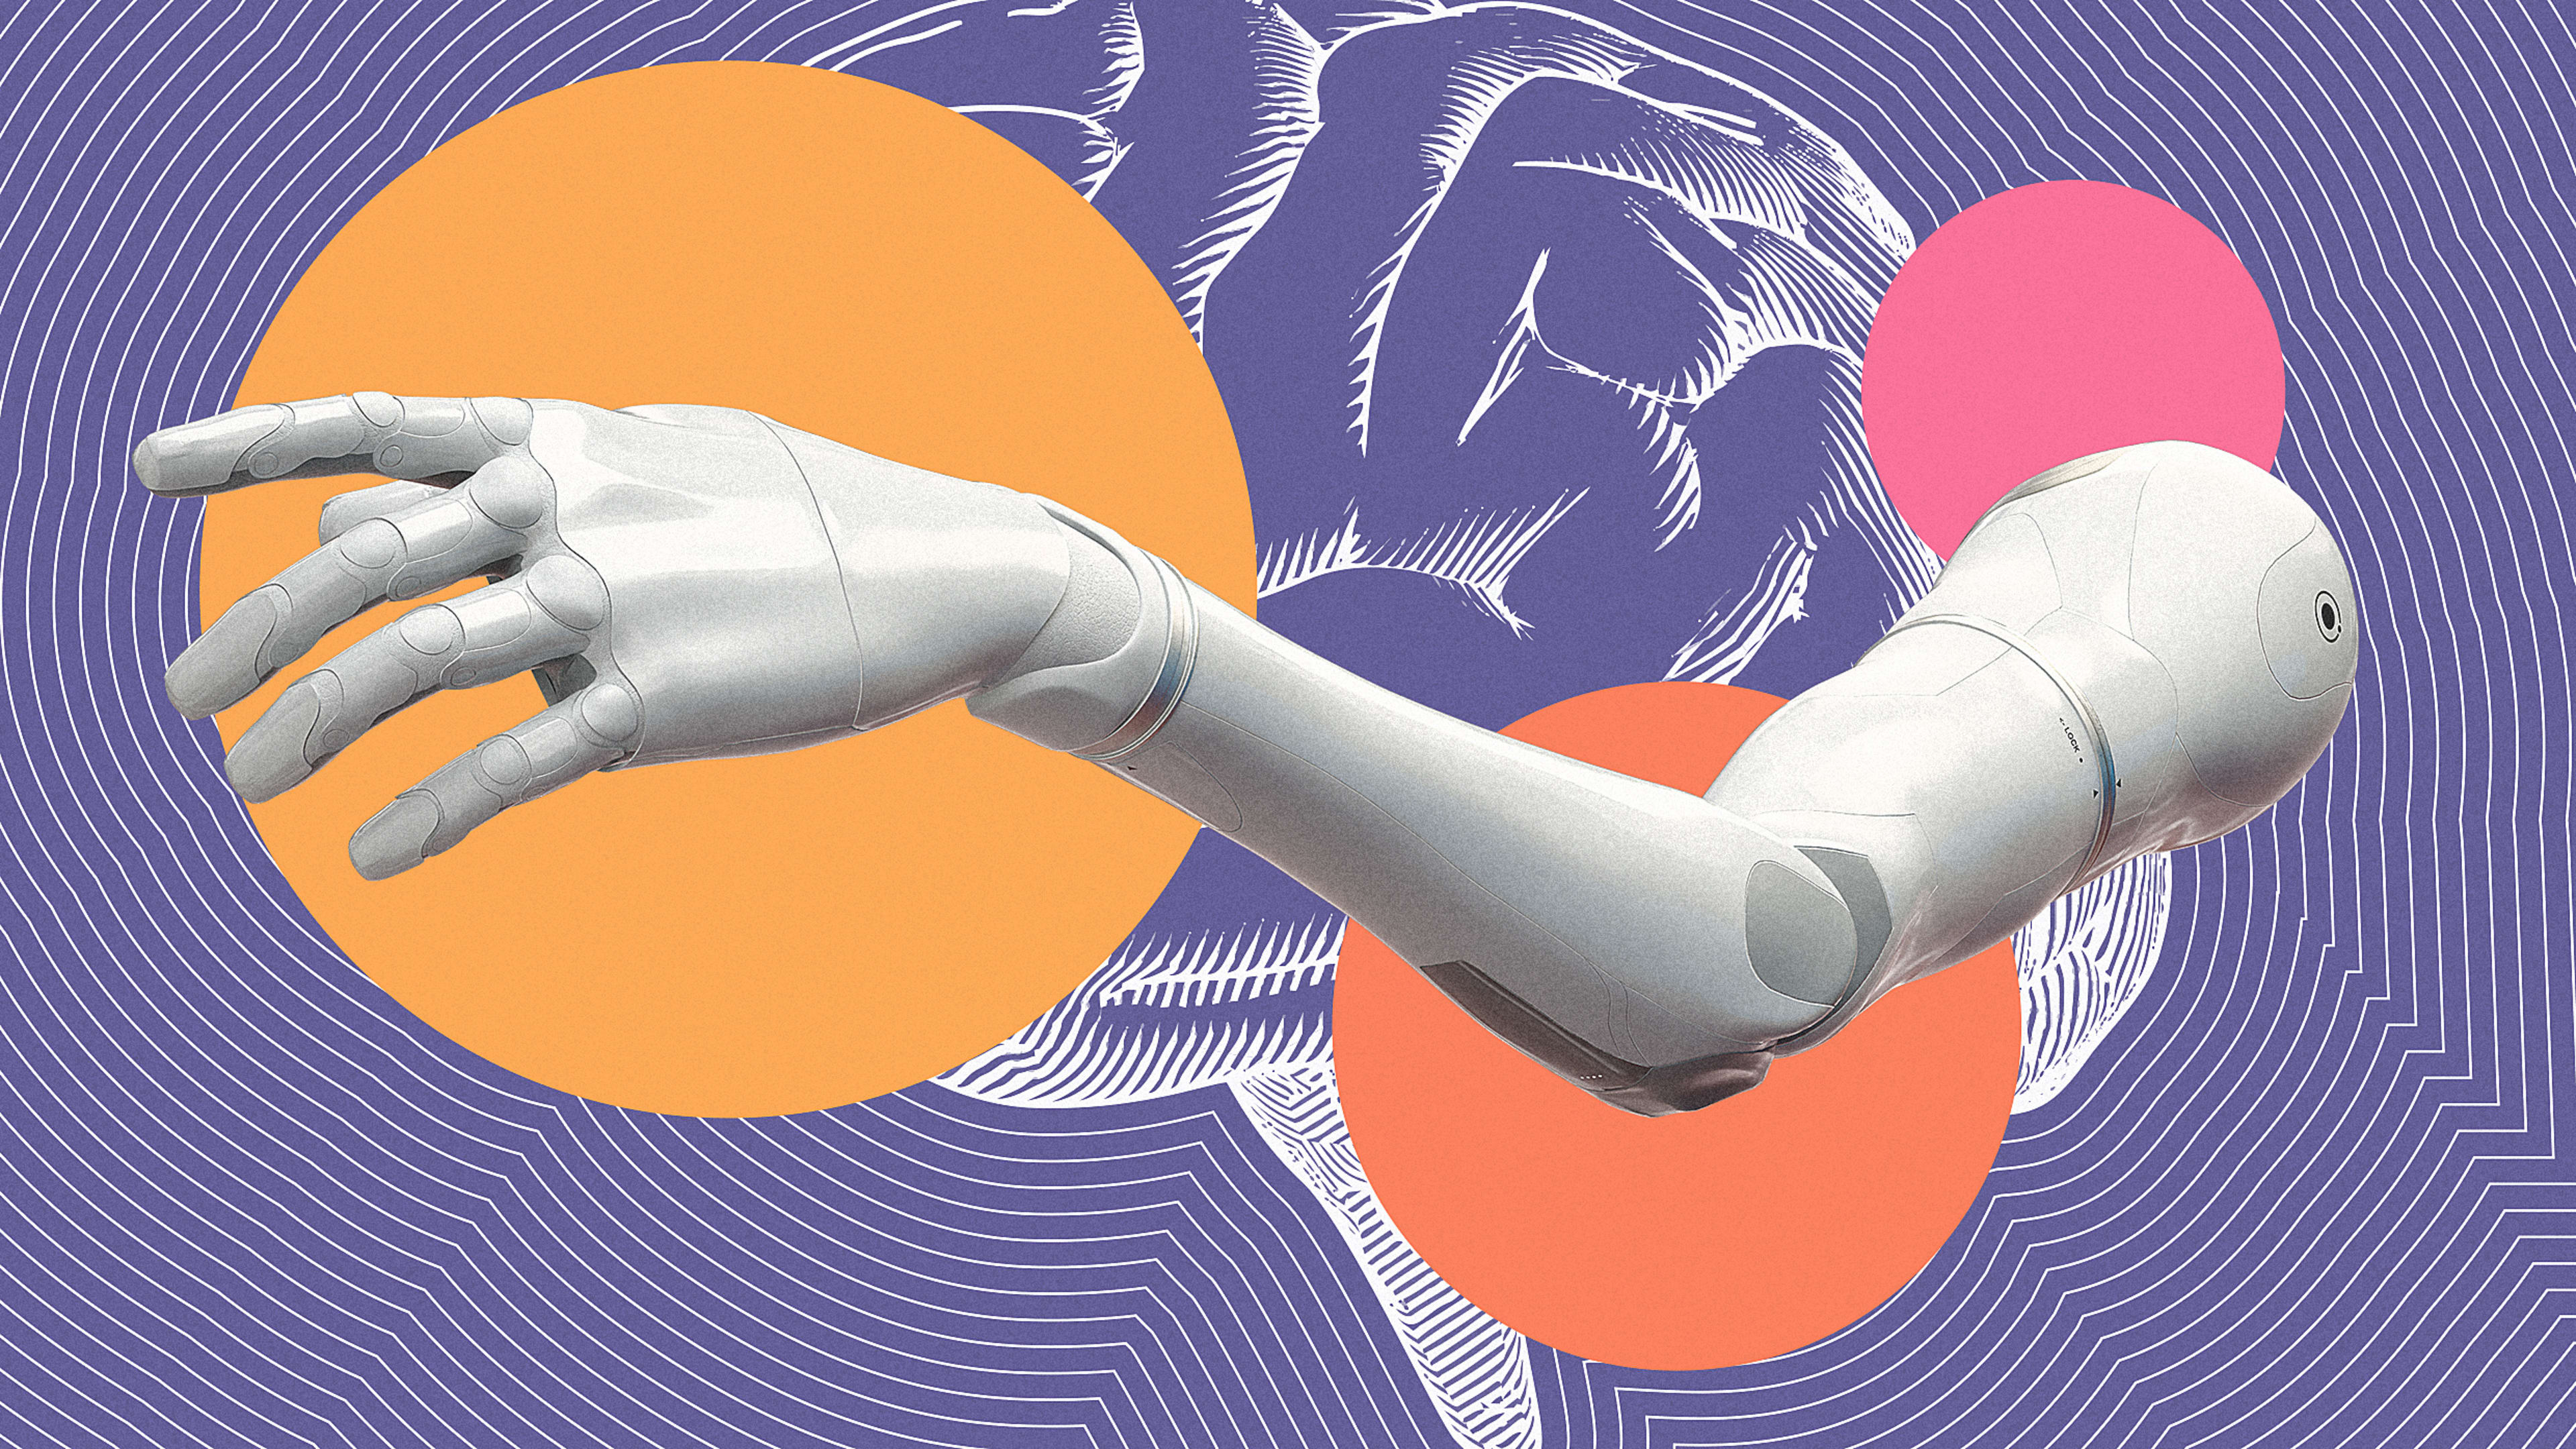 This startup is bringing the first mind-controlled prosthetic arm to market